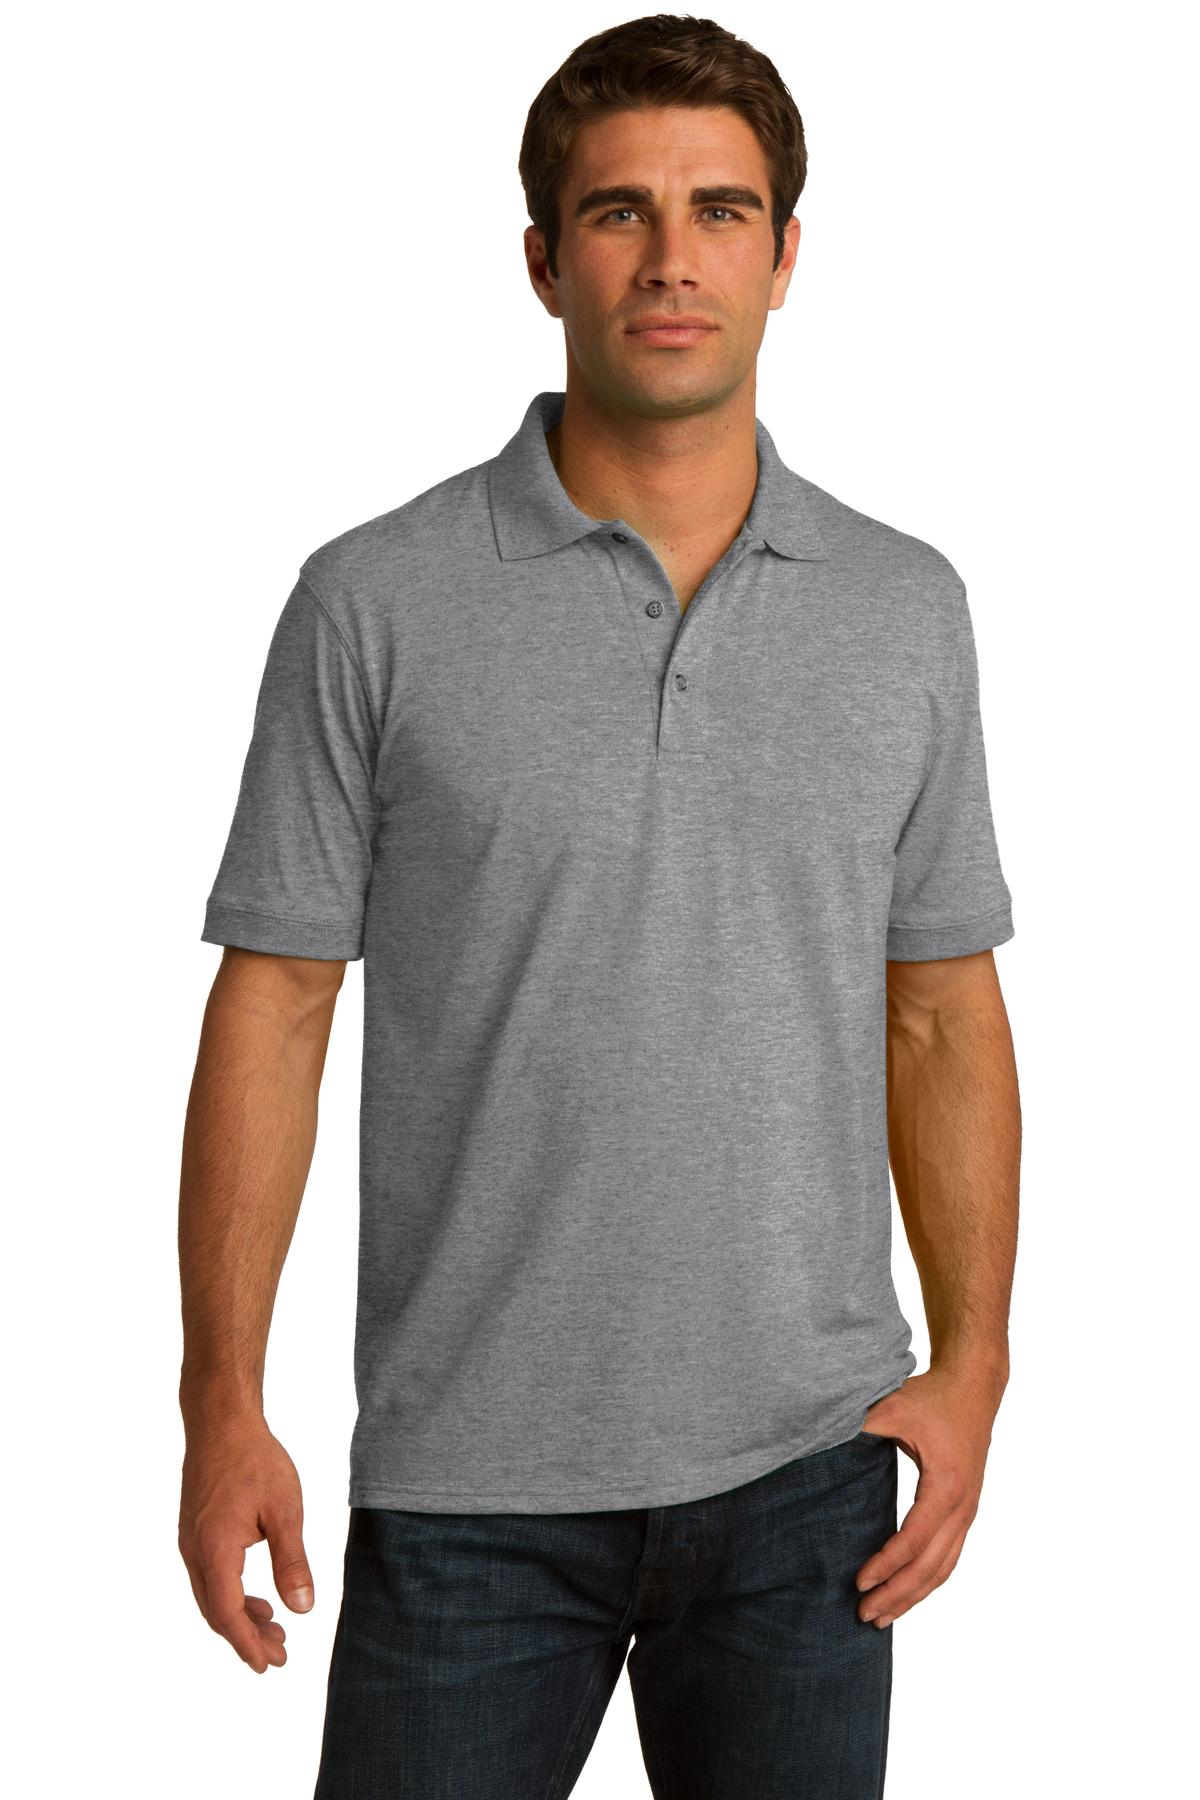 Port and Company Core Blend Jersey Knit Polo. KP55